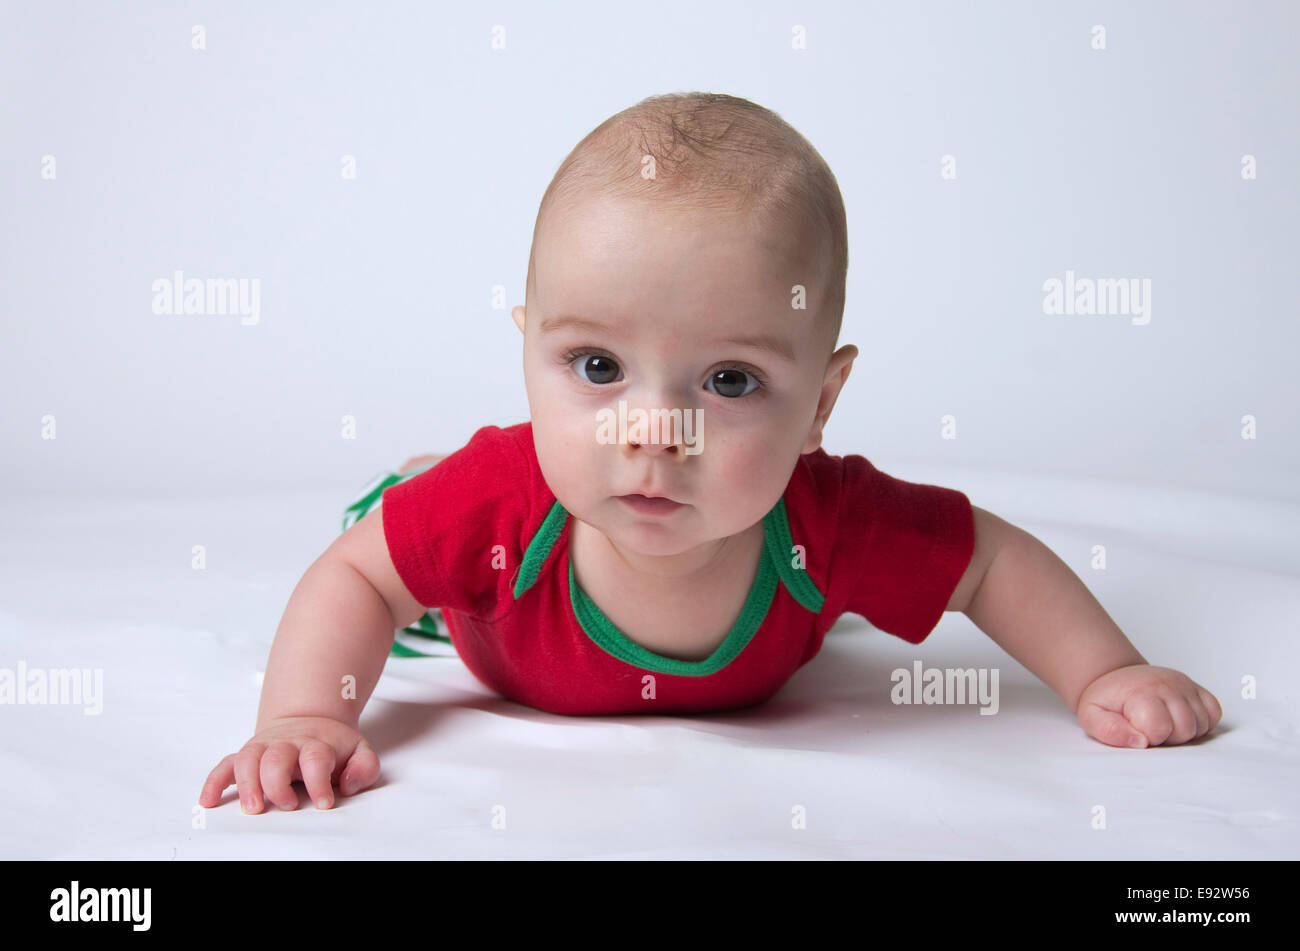 9 month old baby boy holding head up and looking serious, wearing Christmas colors Stock Photo